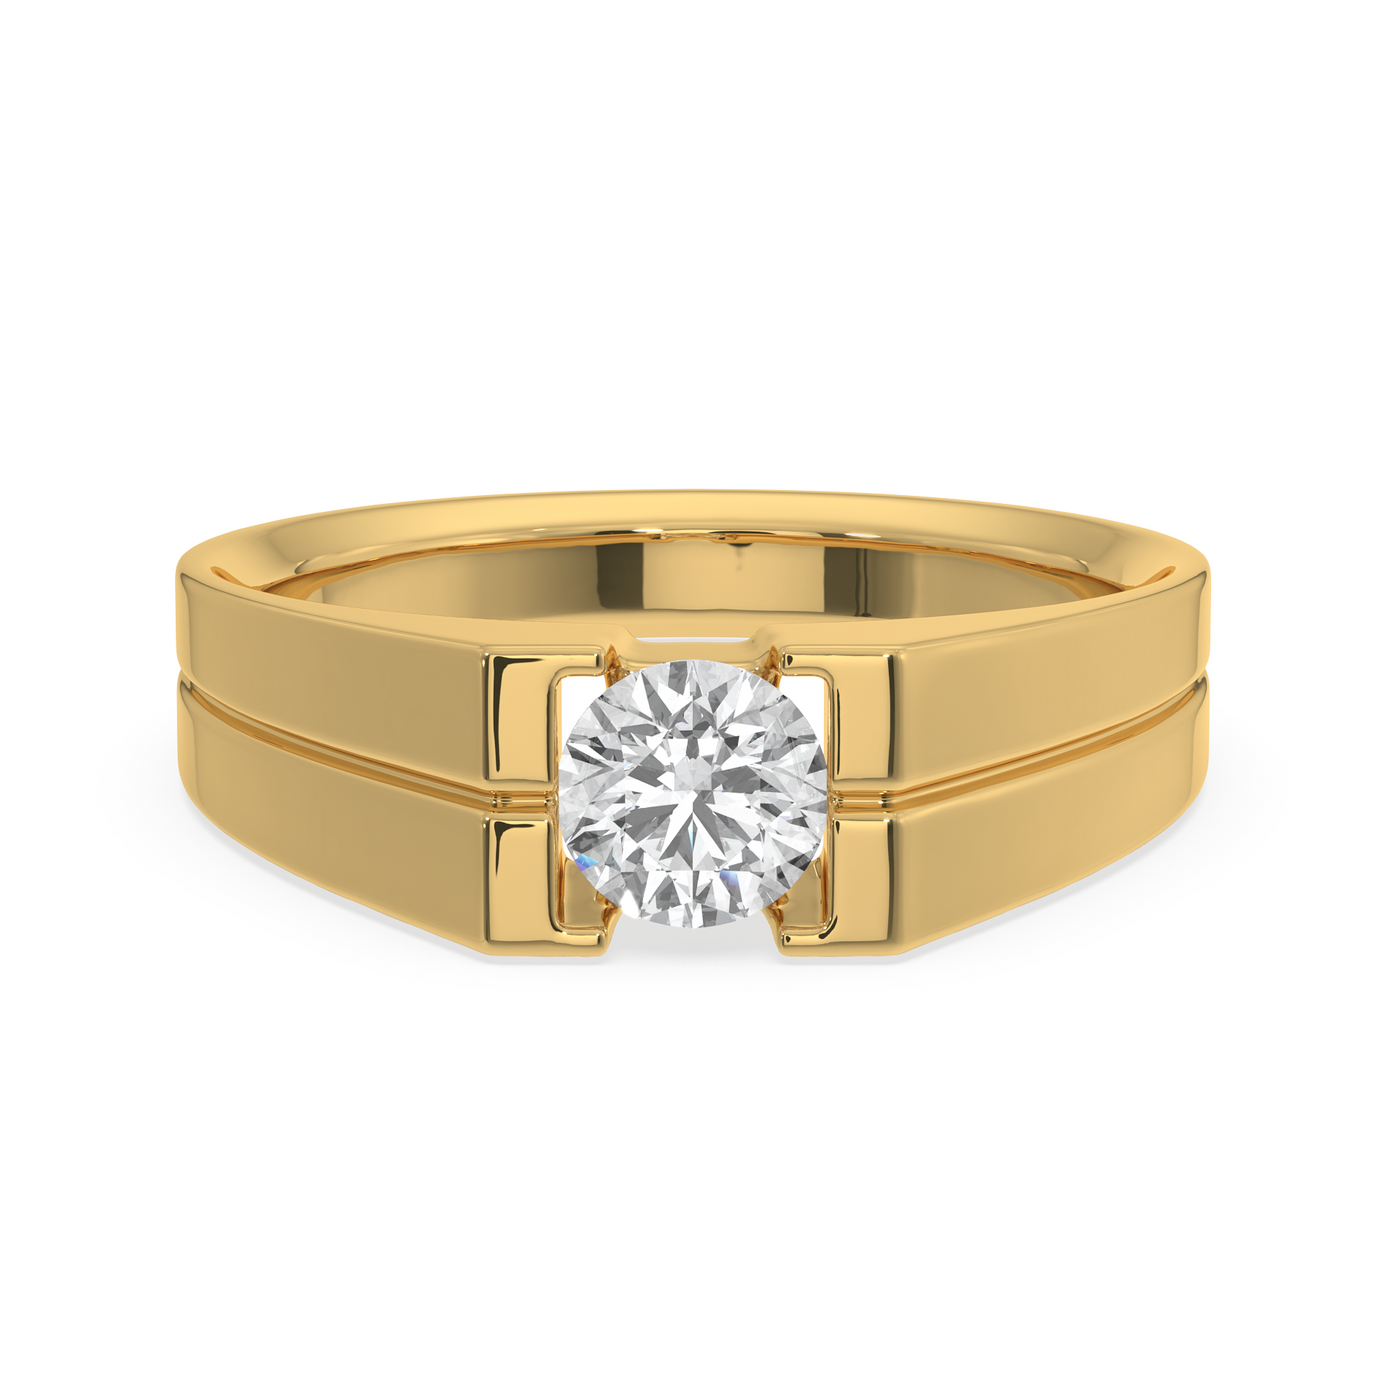 SY Men's Ring in Gold, Channel-Setting